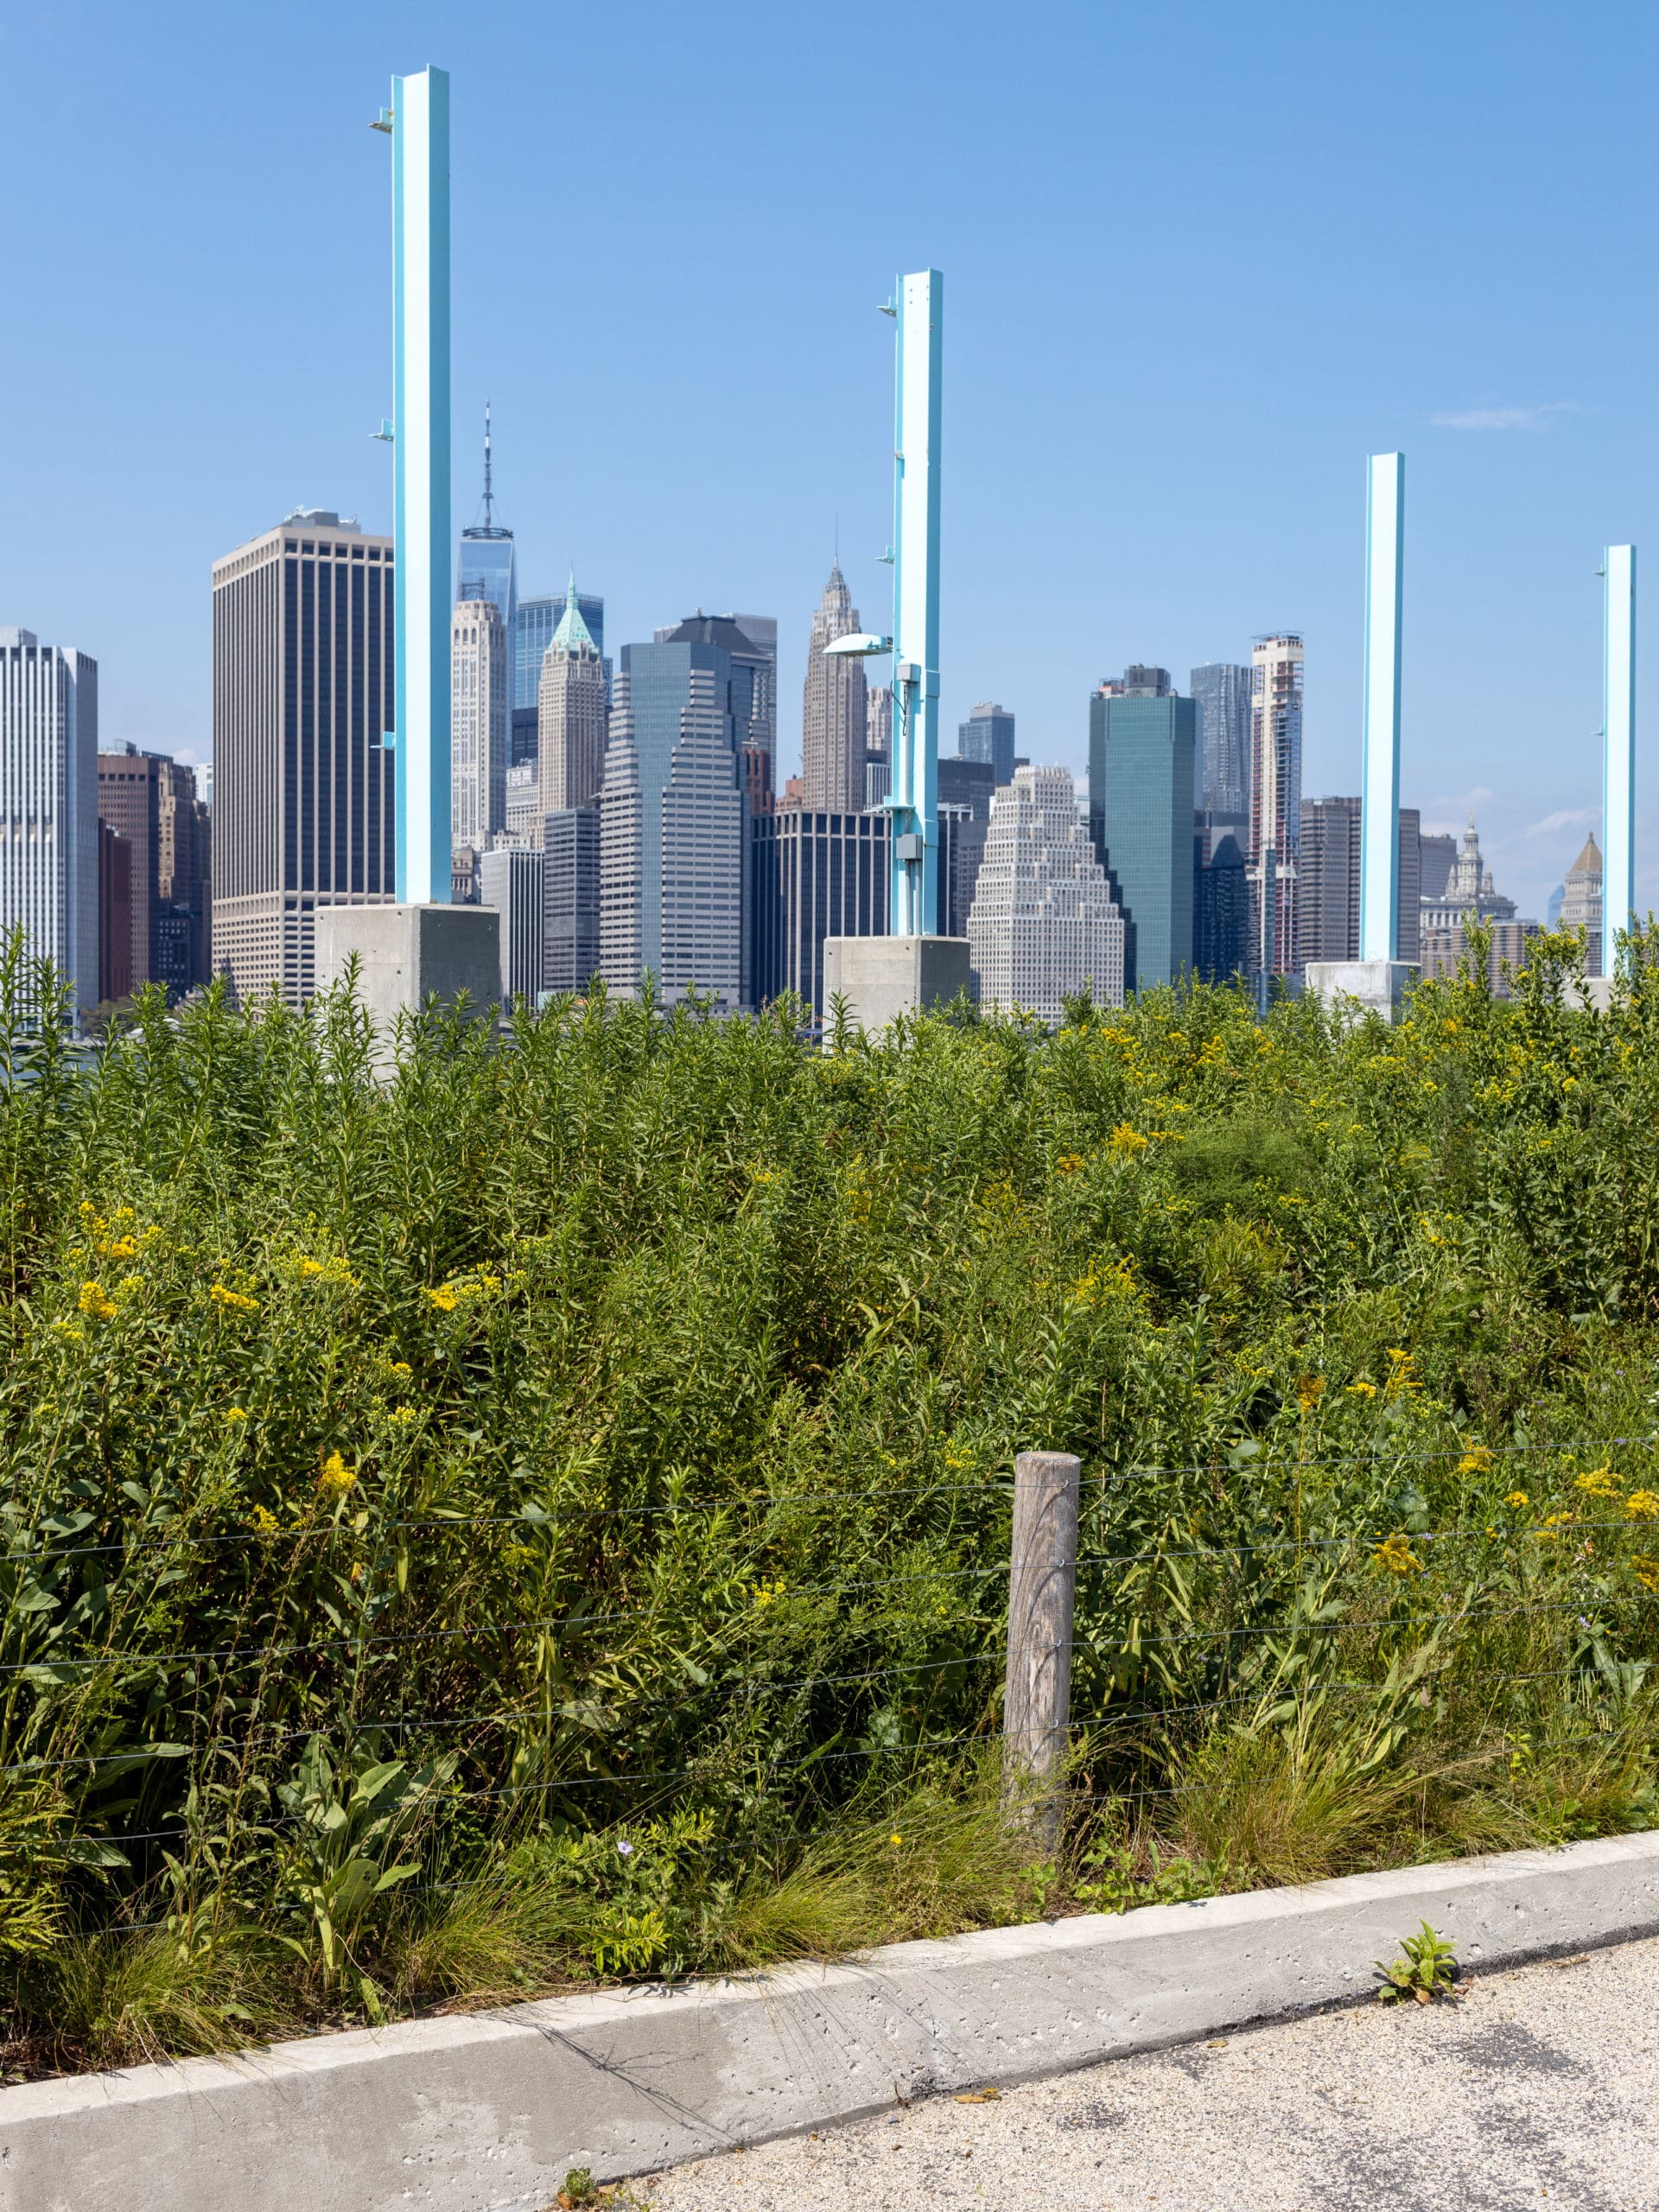 Flowers along the pathway on a sunny day. Lower Manhattan can be seen in the background.